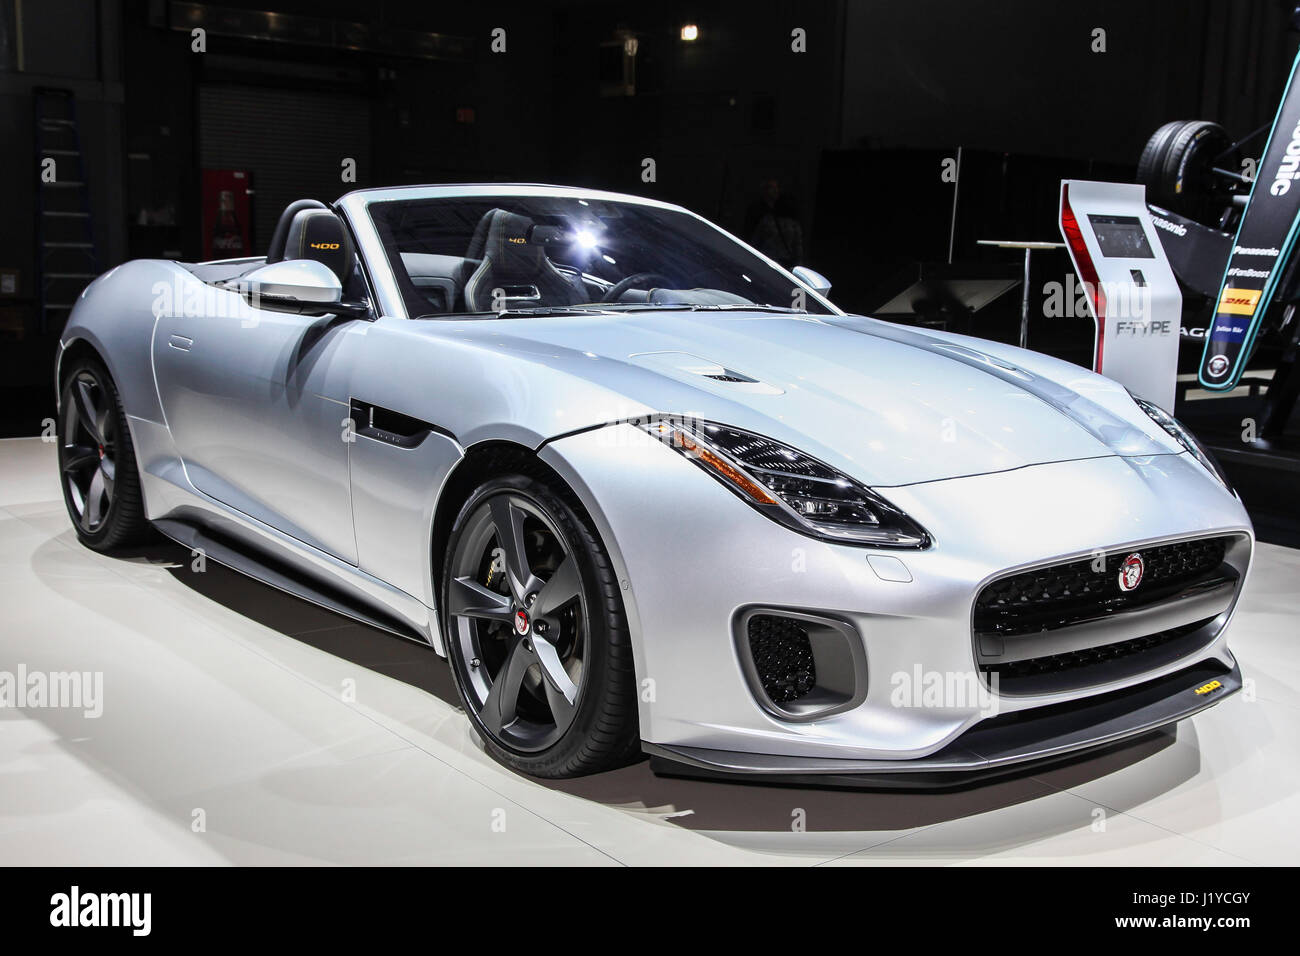 Jaguar F Type 400  Sport Convertible shown at the New York International Auto Show 2017, at the Jacob Javits Center. Stock Photo